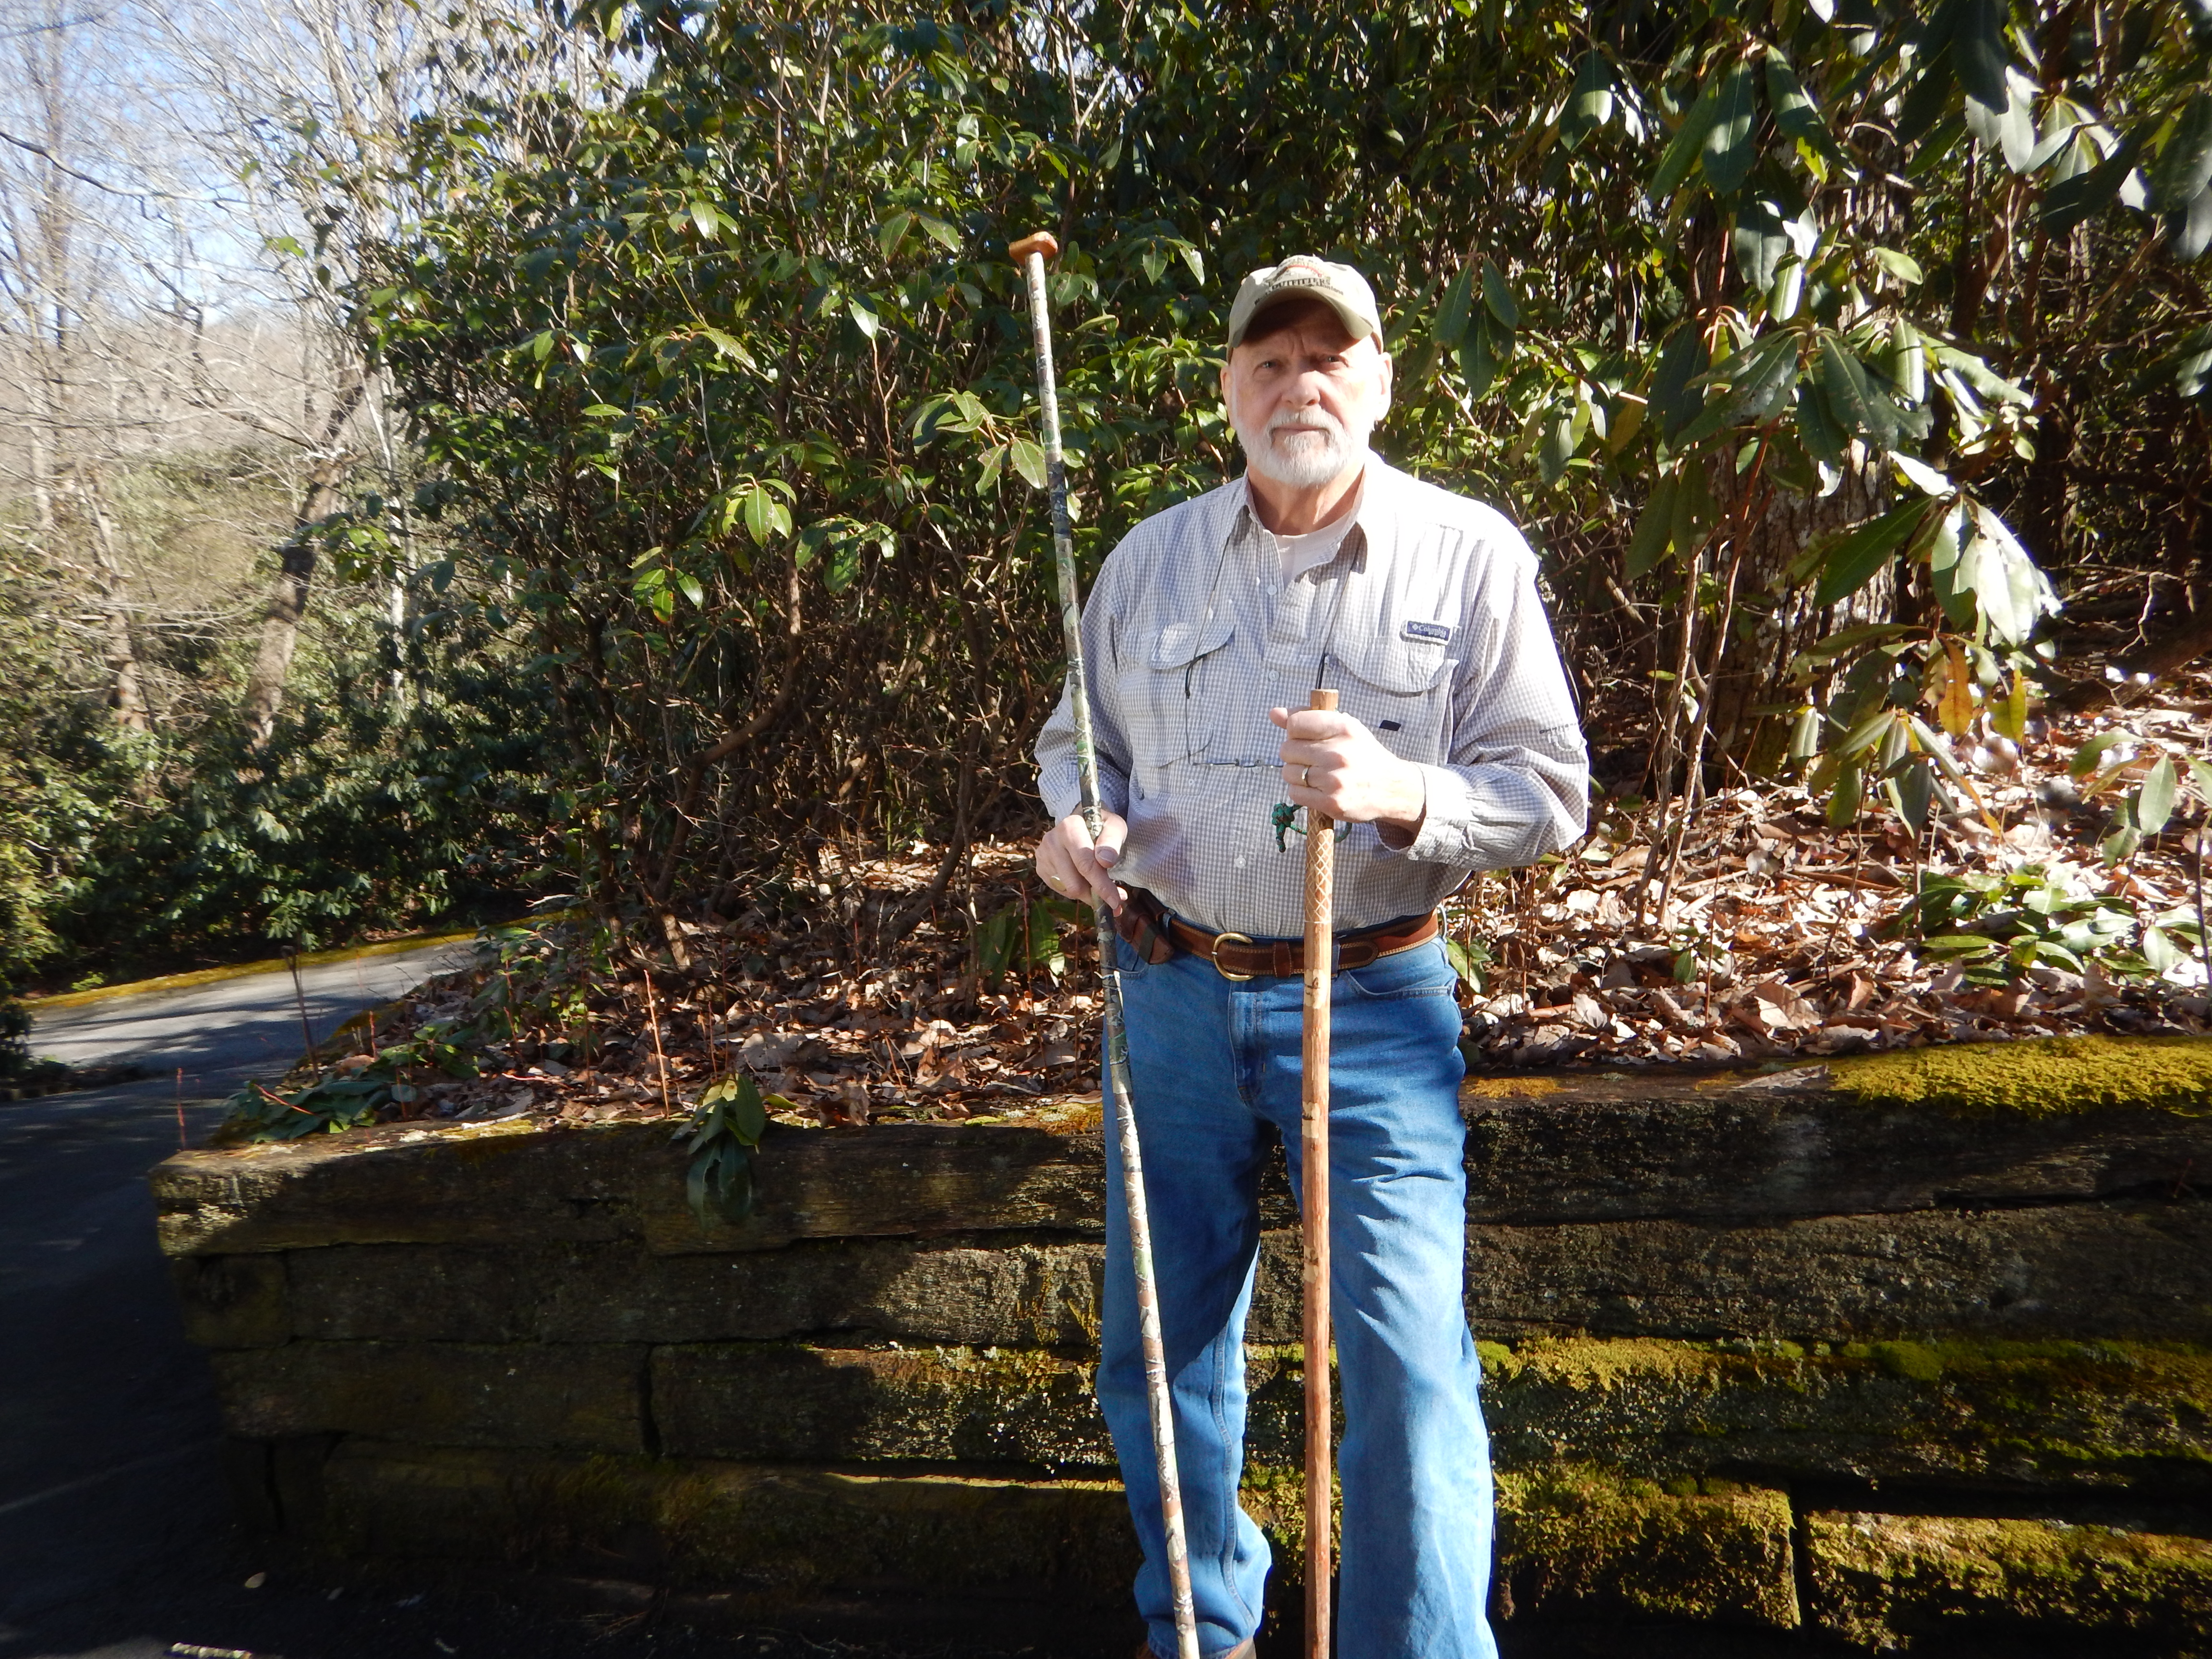 Author Profile: L. Woodrow Ross  An Outdoorsman For the Ages